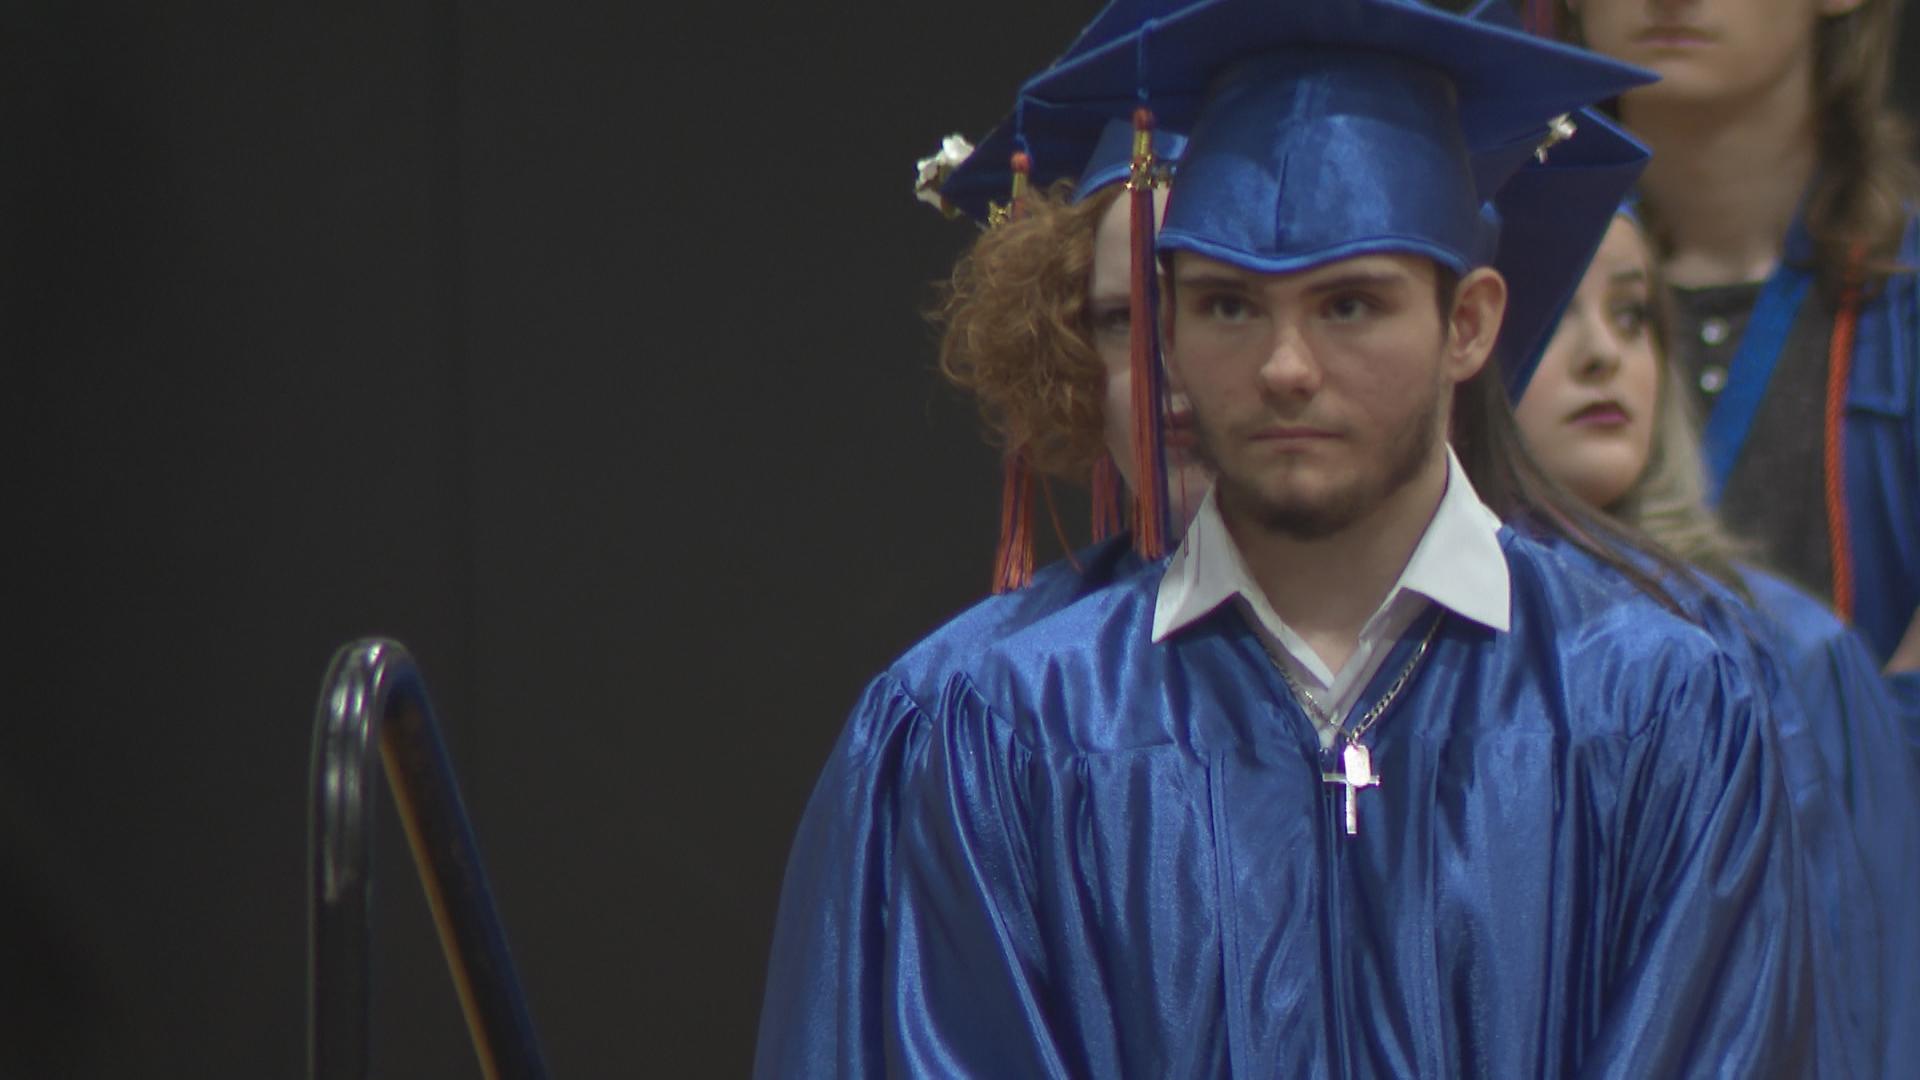 Friday night, some 200 graduates of the Missouri Virtual Academy received their diplomas in Jefferson County after completing all of their required courses online.